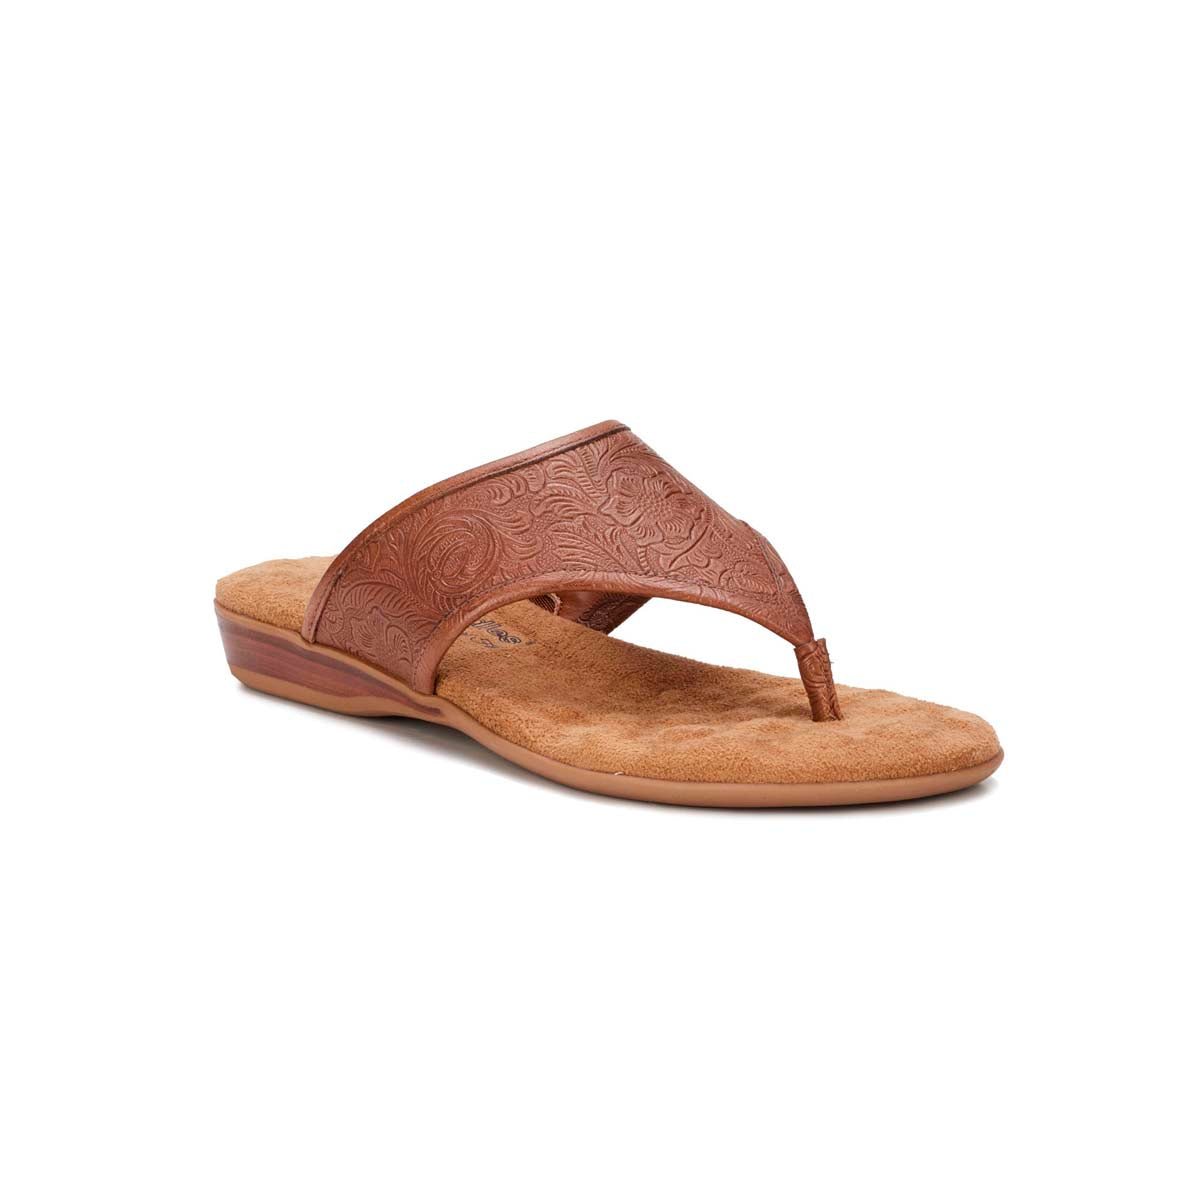 WALKING CRADLES WC NELLA II WOMEN FLIP-FLOP SANDALS IN TAN TOOLED LEATHER - TLW Shoes